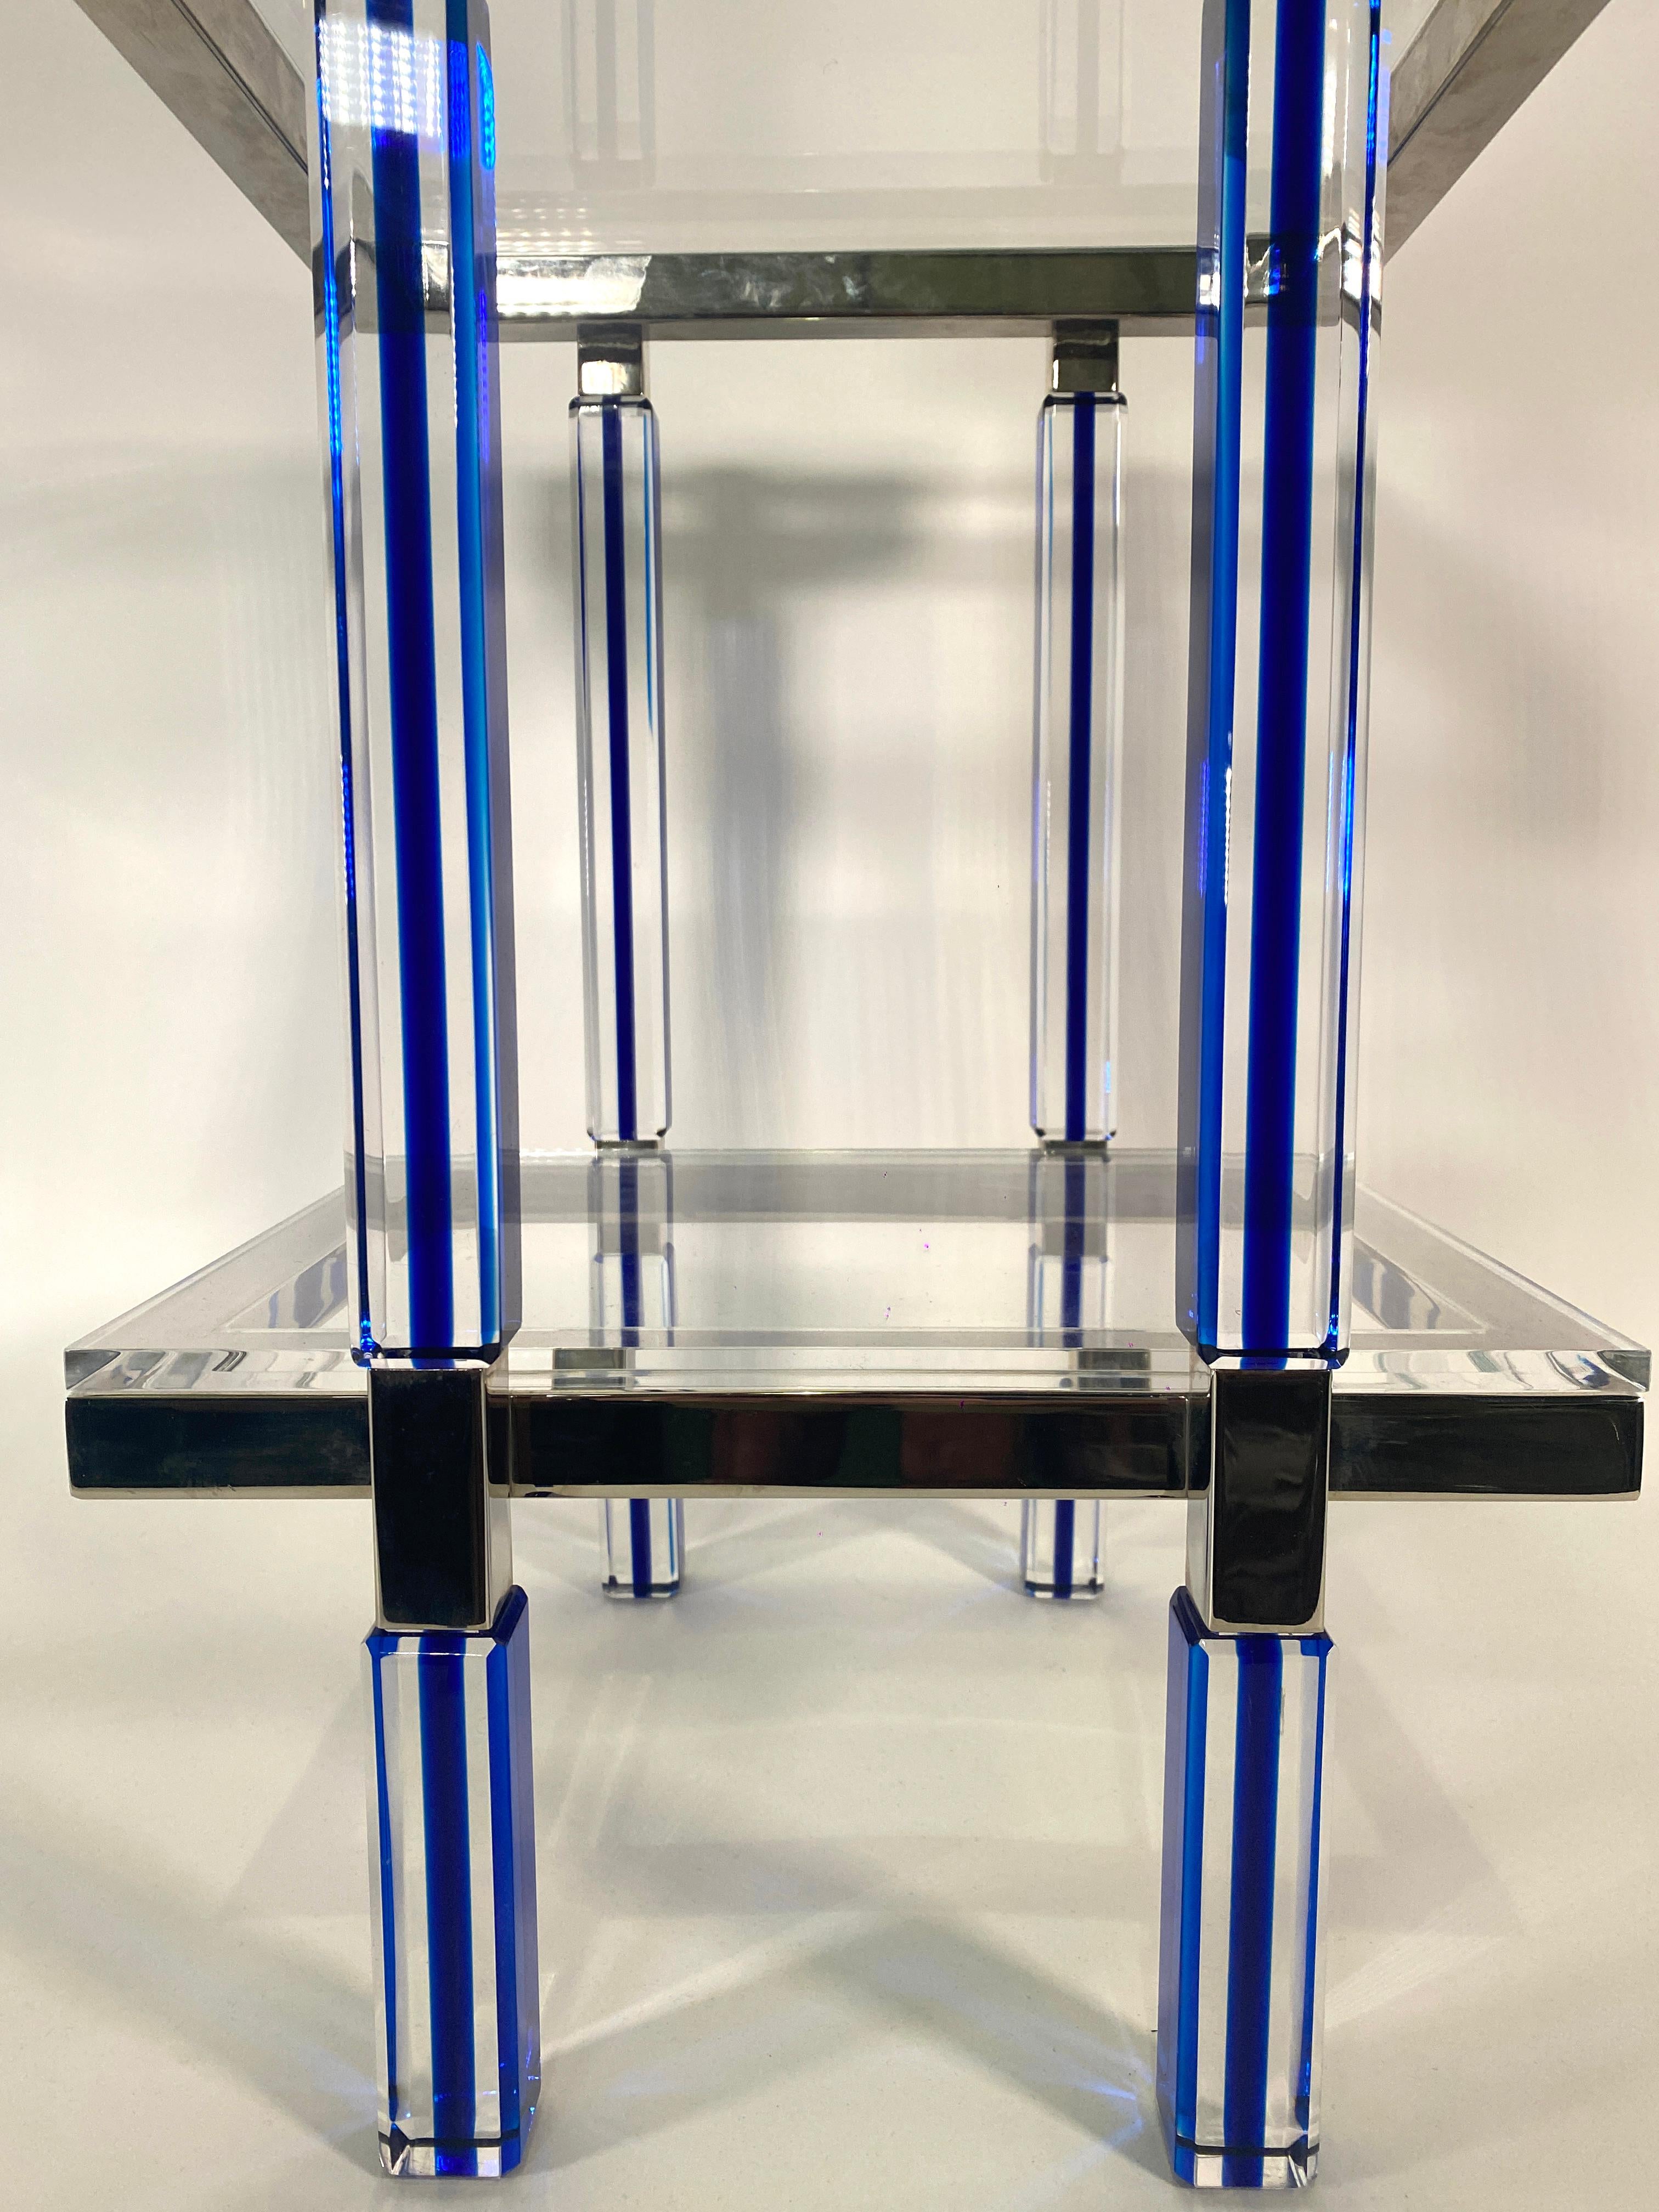 the lucite top above a nickel frame on striped clear and azure blue lucite legs, with a second tier with lucite top. Production of these will be limited to 12 pieces. We are exclusive dealers of these tables for Charles Hollis Jones.
 
**These are